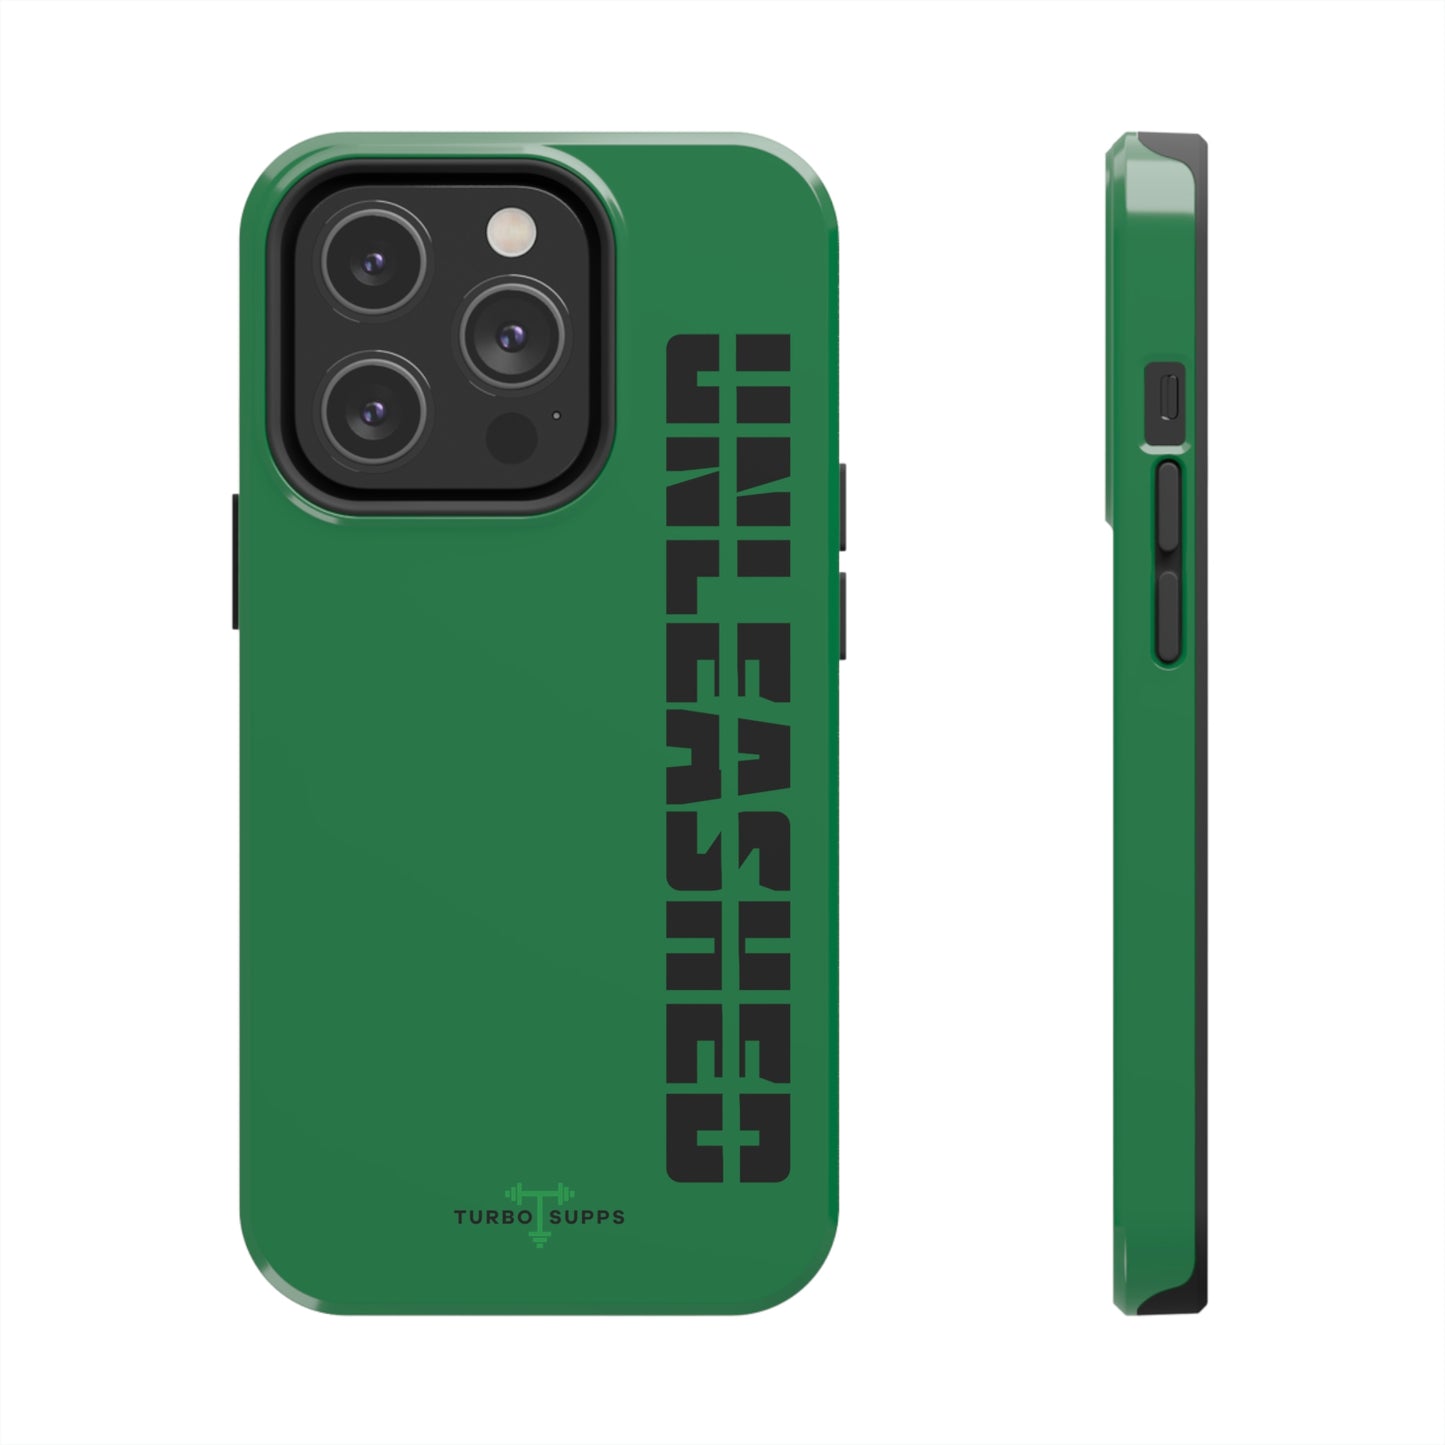 Unleashed Phone Case - iPhone